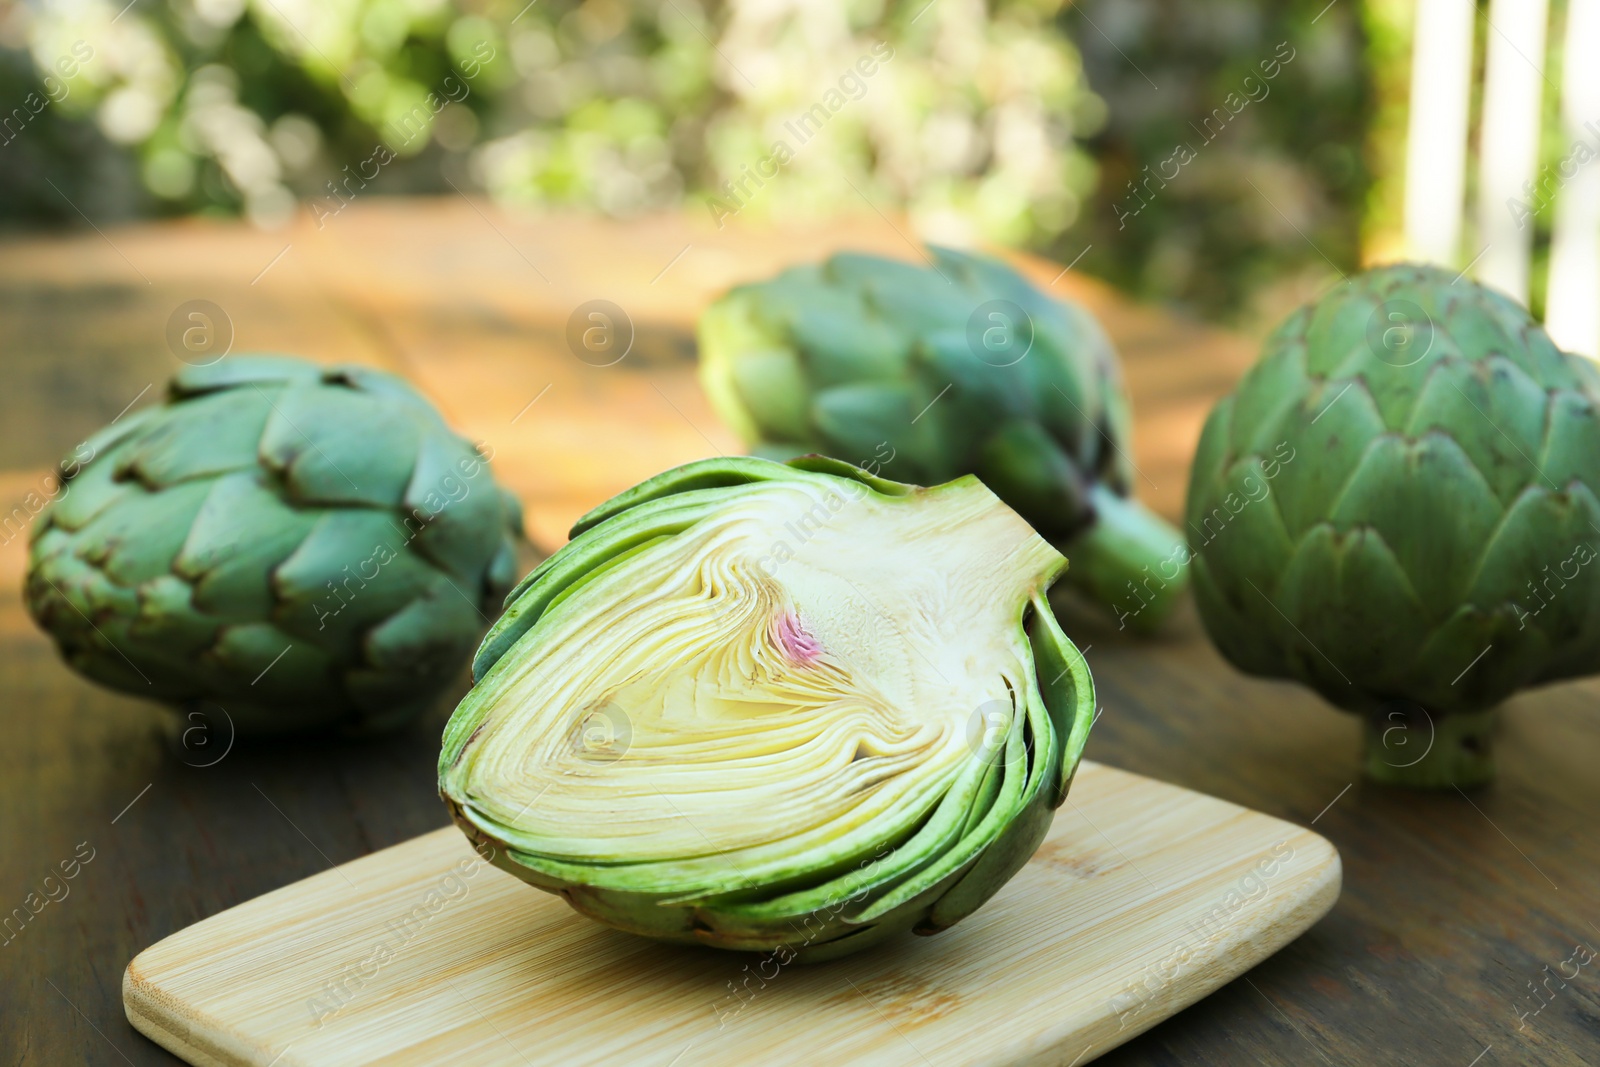 Photo of Whole and cut fresh raw artichokes on wooden table outdoors, closeup